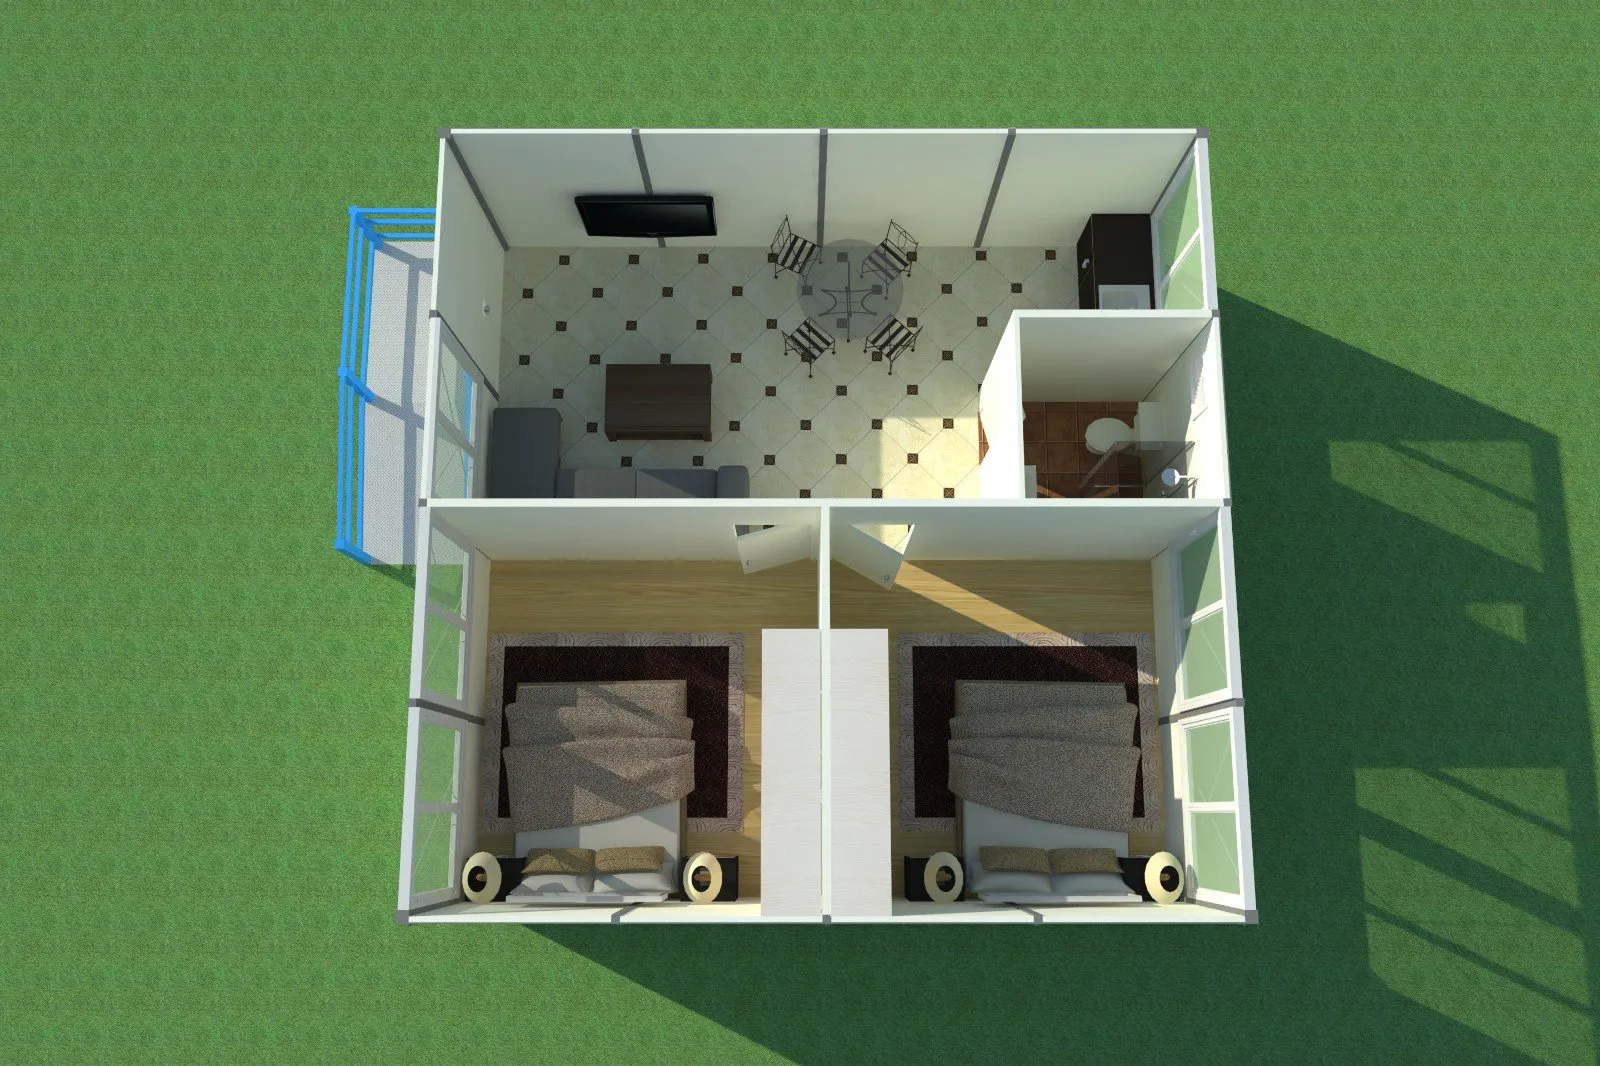 low cost prefab houses china online for accommodation worker